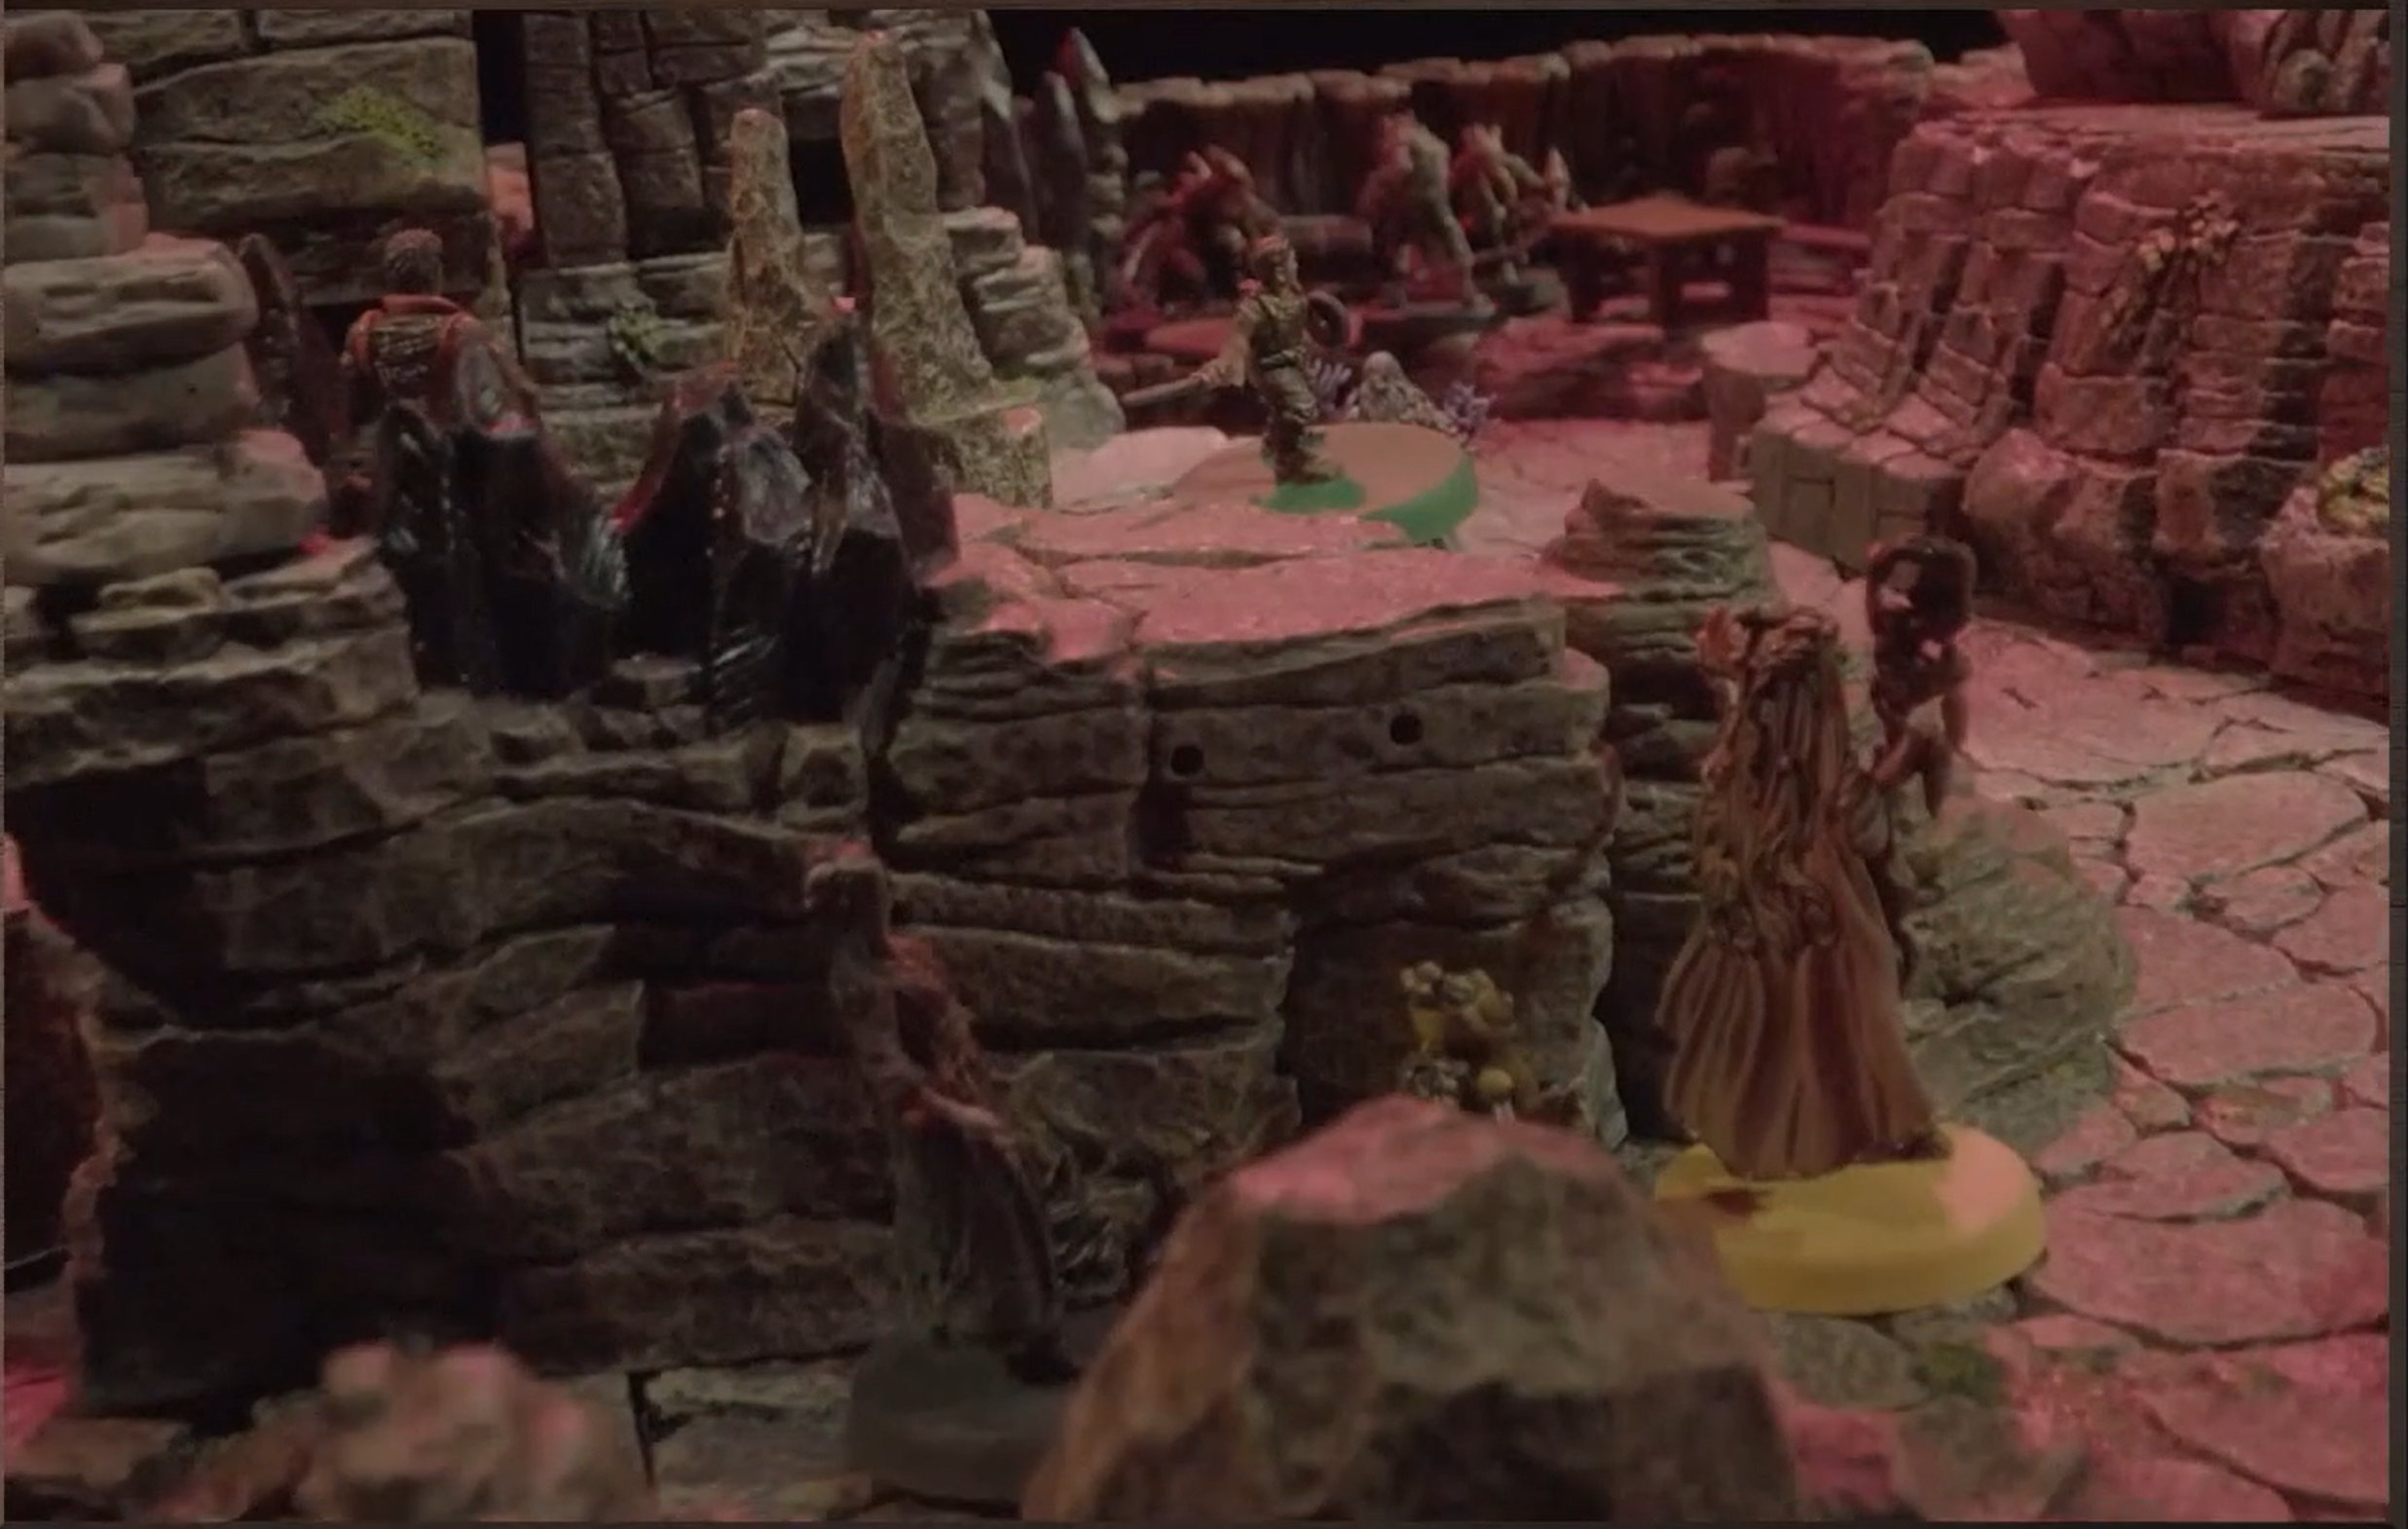 A battlemap of rock-walled space dotted with rock formations and stalagmites. Orym is on a ledge, Fearne is in the foreground near him, Imogen is visible in the background, and a humanoid with armor is on the ledge near Orym.